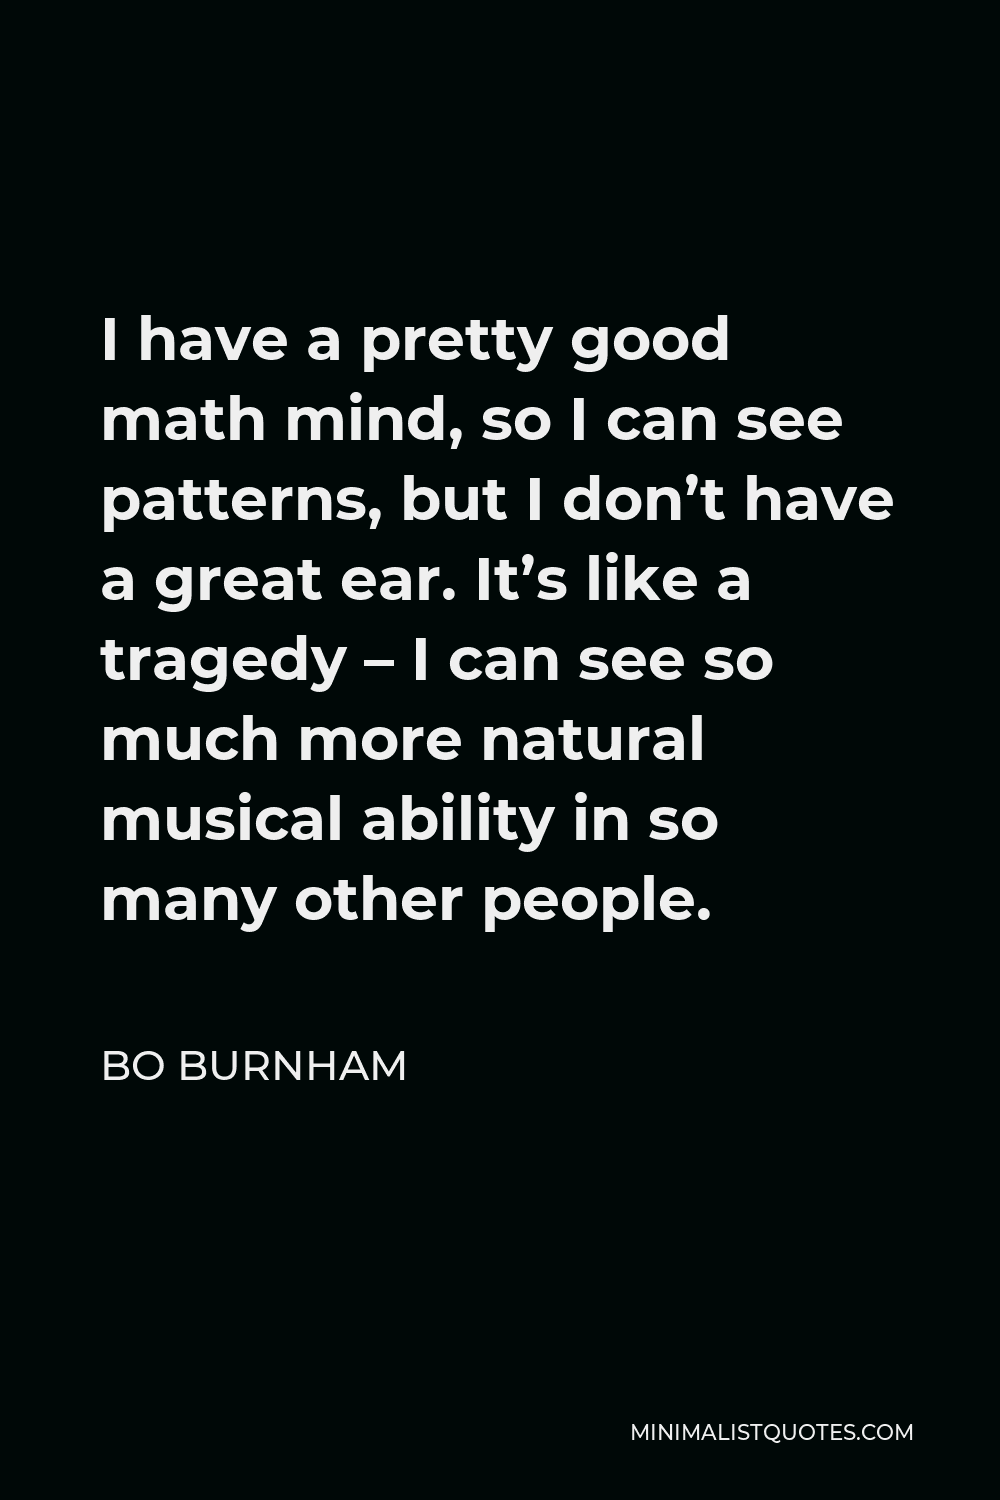 Bo Burnham Quote - I have a pretty good math mind, so I can see patterns, but I don’t have a great ear. It’s like a tragedy – I can see so much more natural musical ability in so many other people.